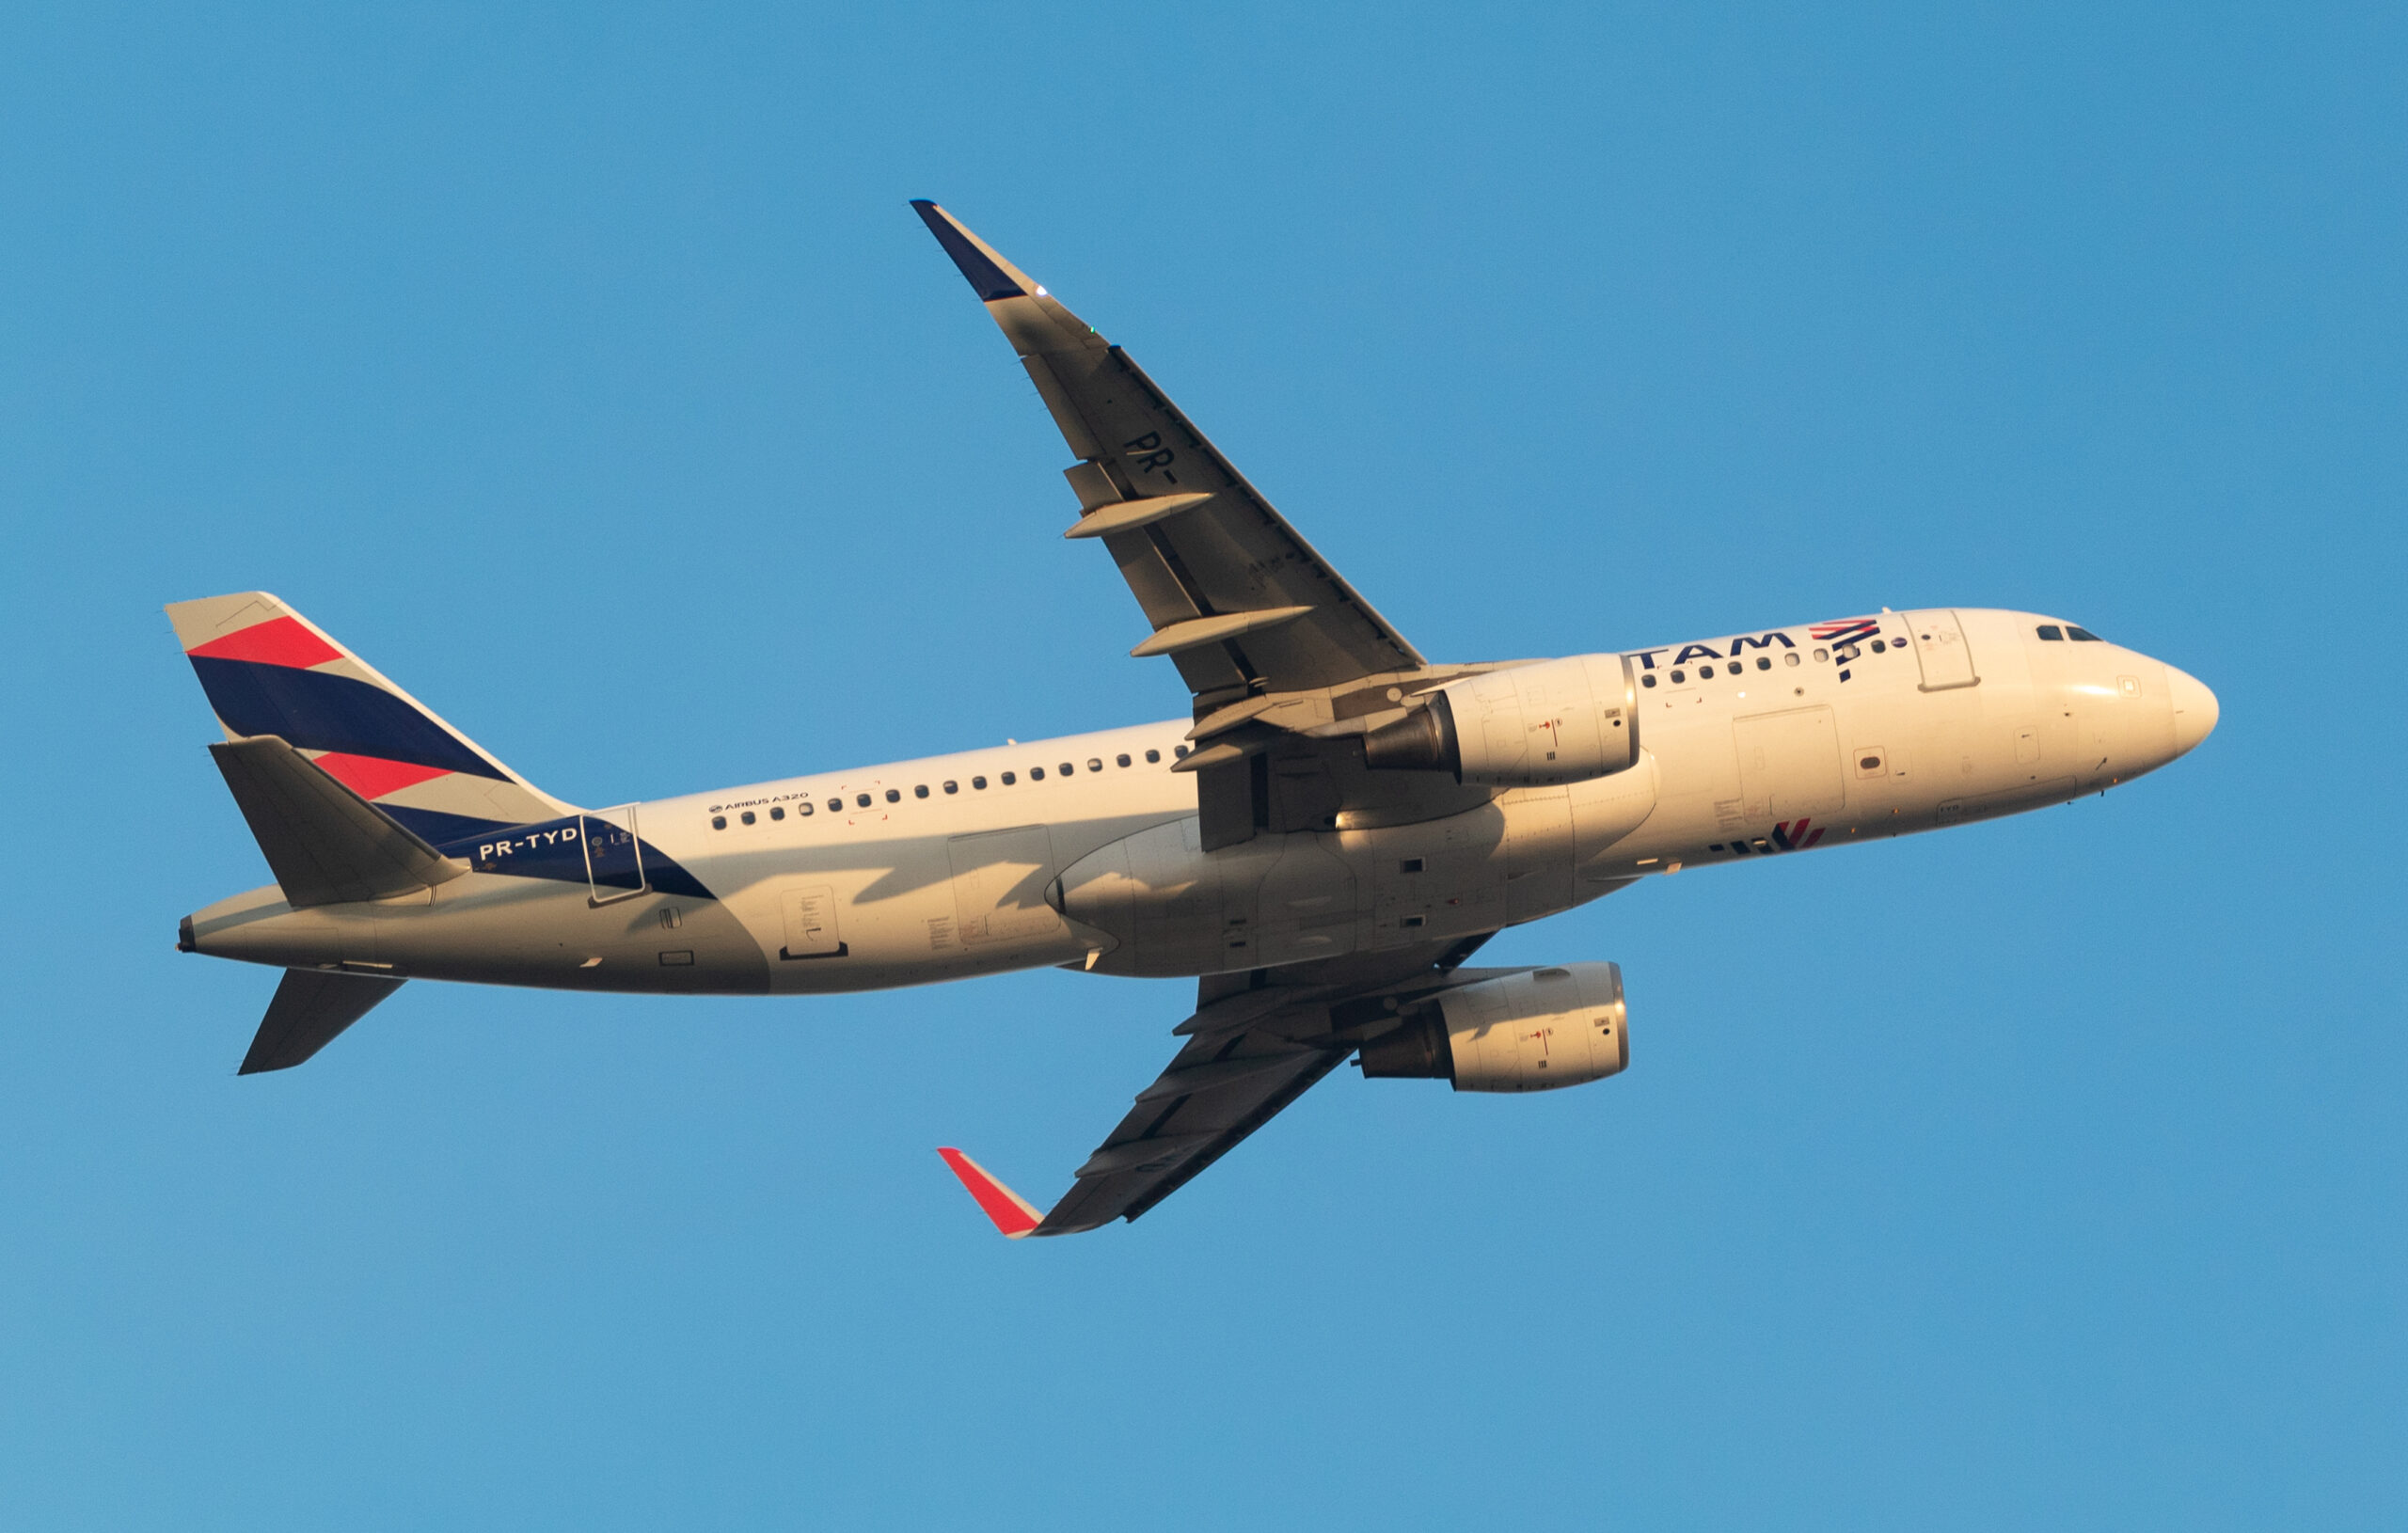 PR-TYD - Airbus A320-212 - LATAM Airlines - Blog do Spotter